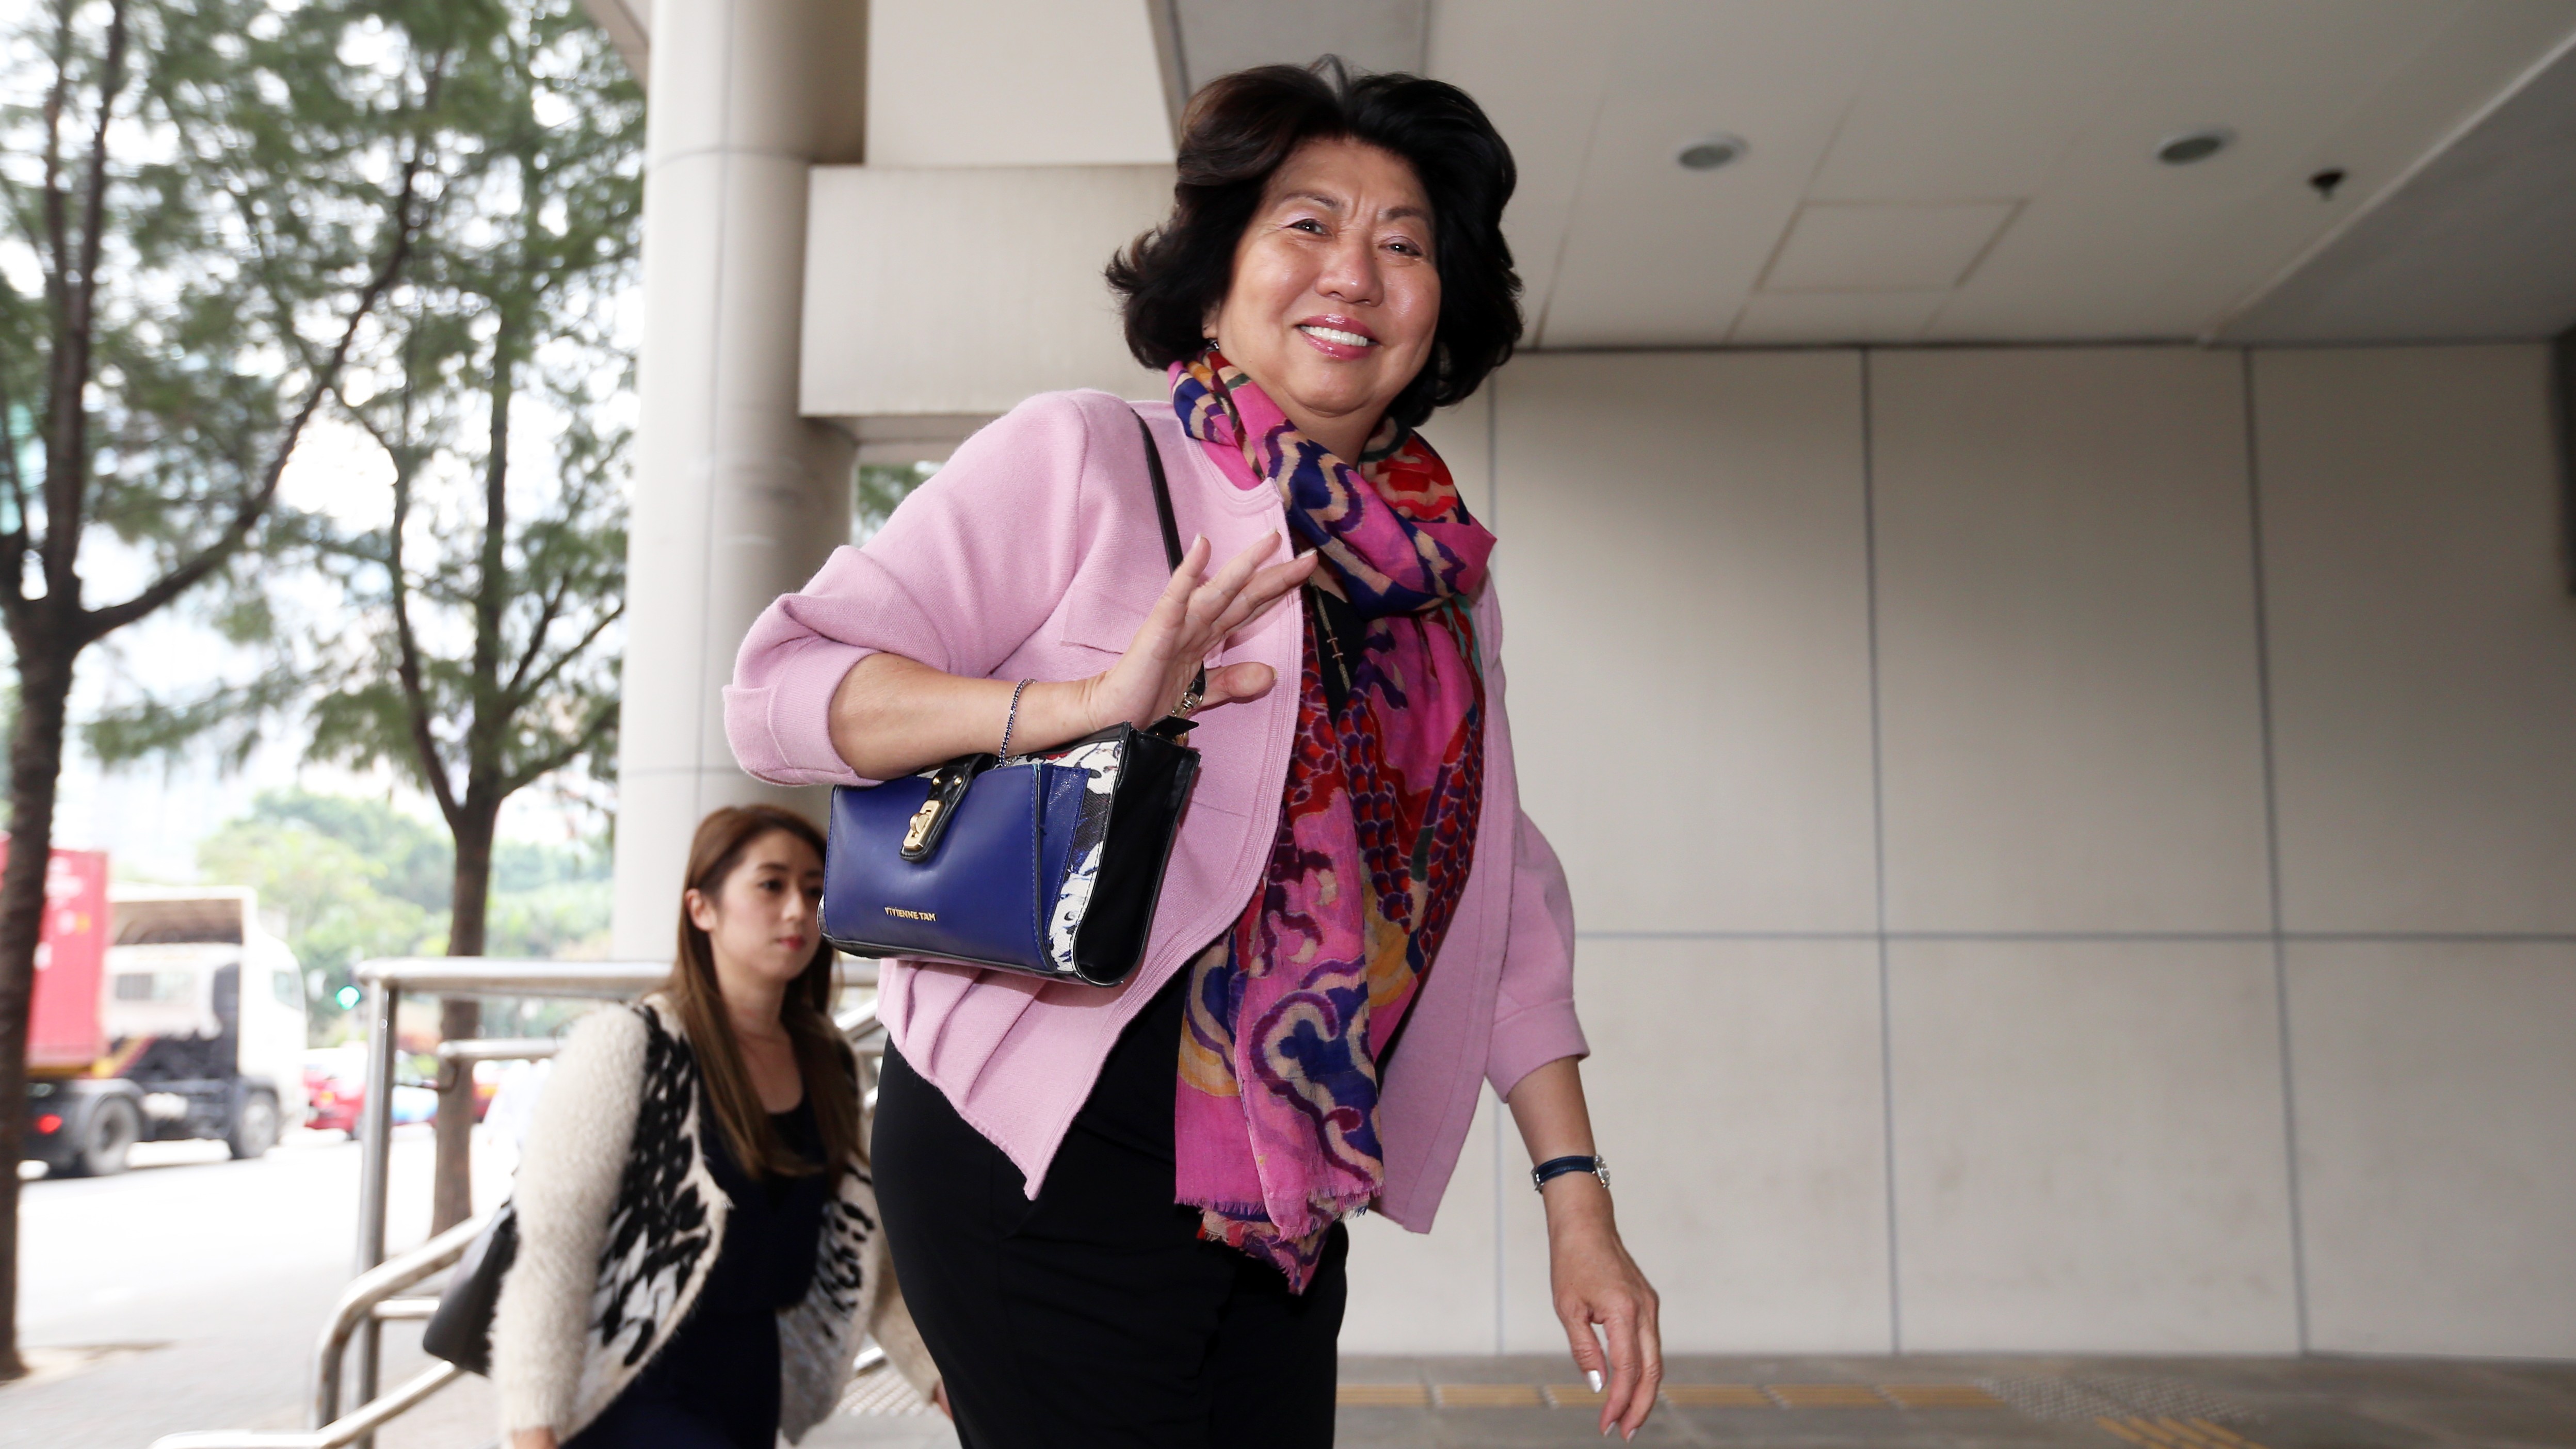 Leonie Ki Man-fung said she forgave Colman Li for his role in a campus siege in which she was injured and asked the magistrate to hand down a lenient sentence. Photo: K.Y. Cheng